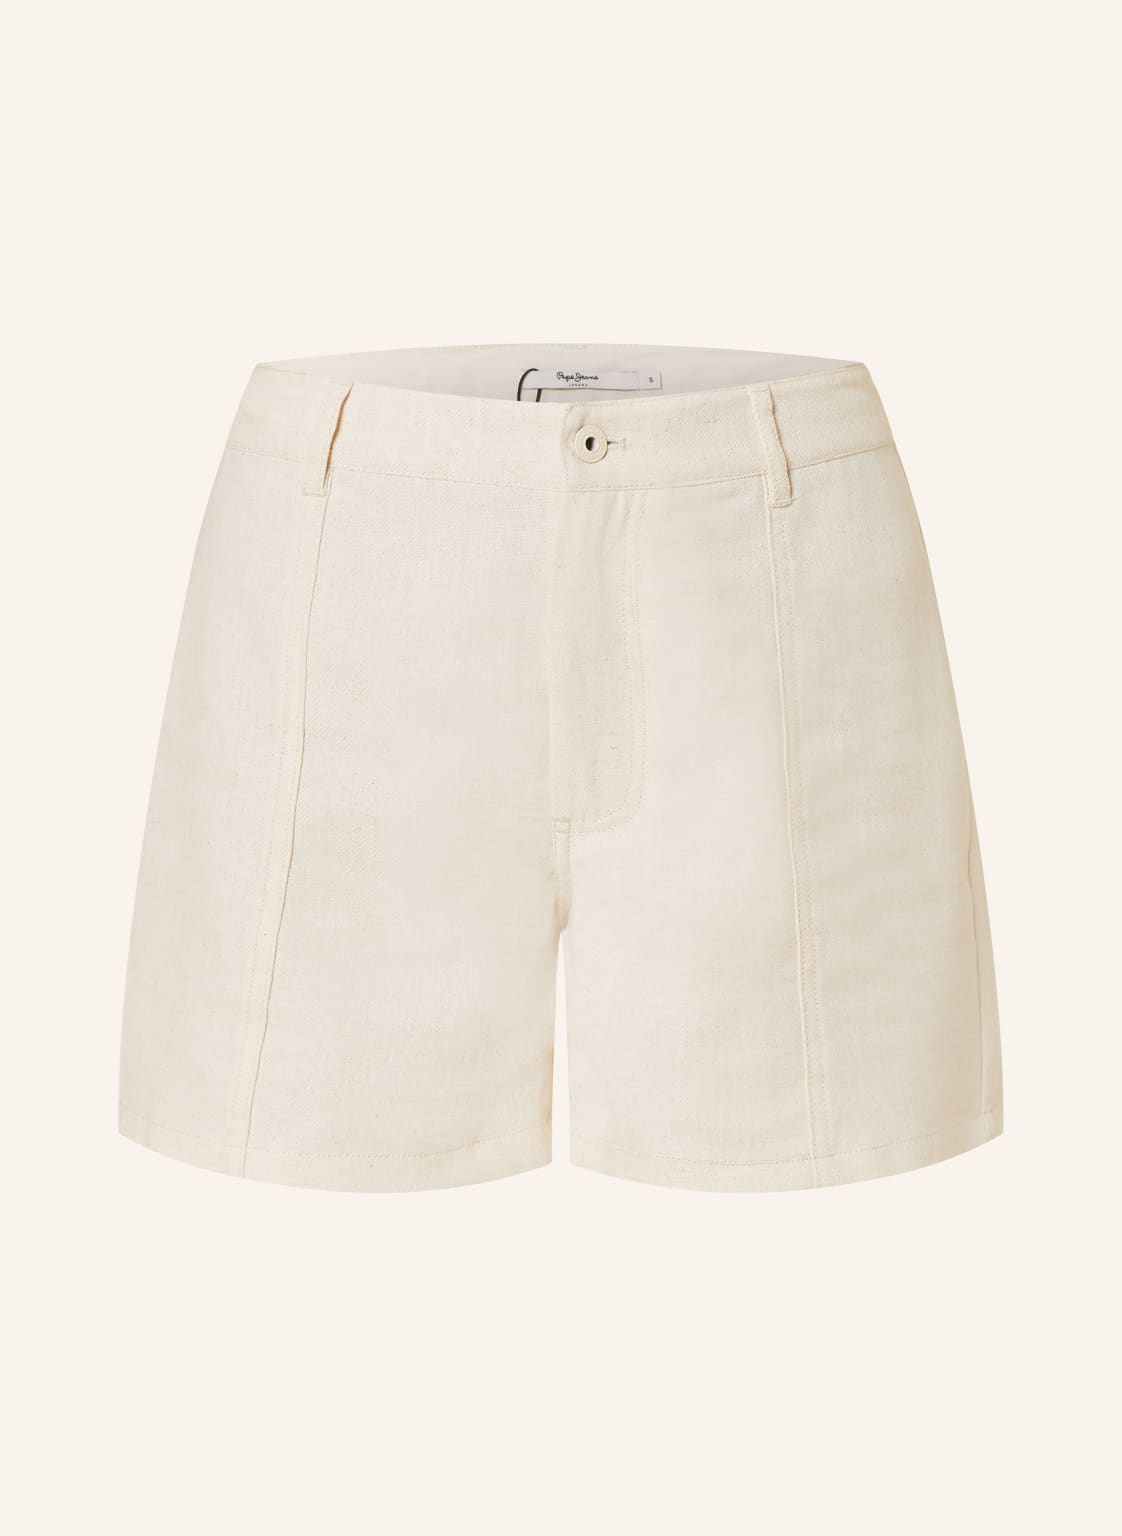 Pepe Jeans Shorts Tilly weiss von Pepe Jeans